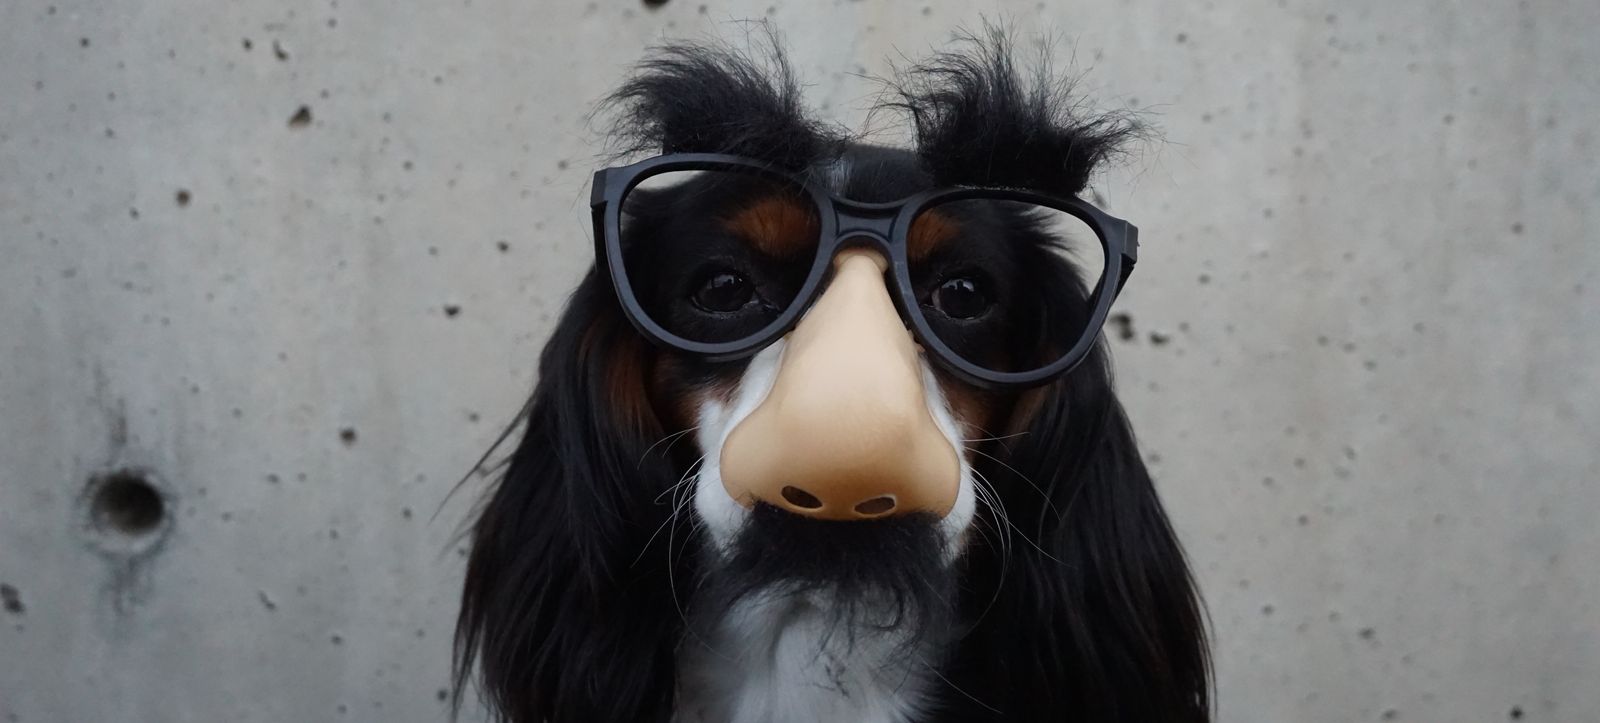 Dog with disguise 